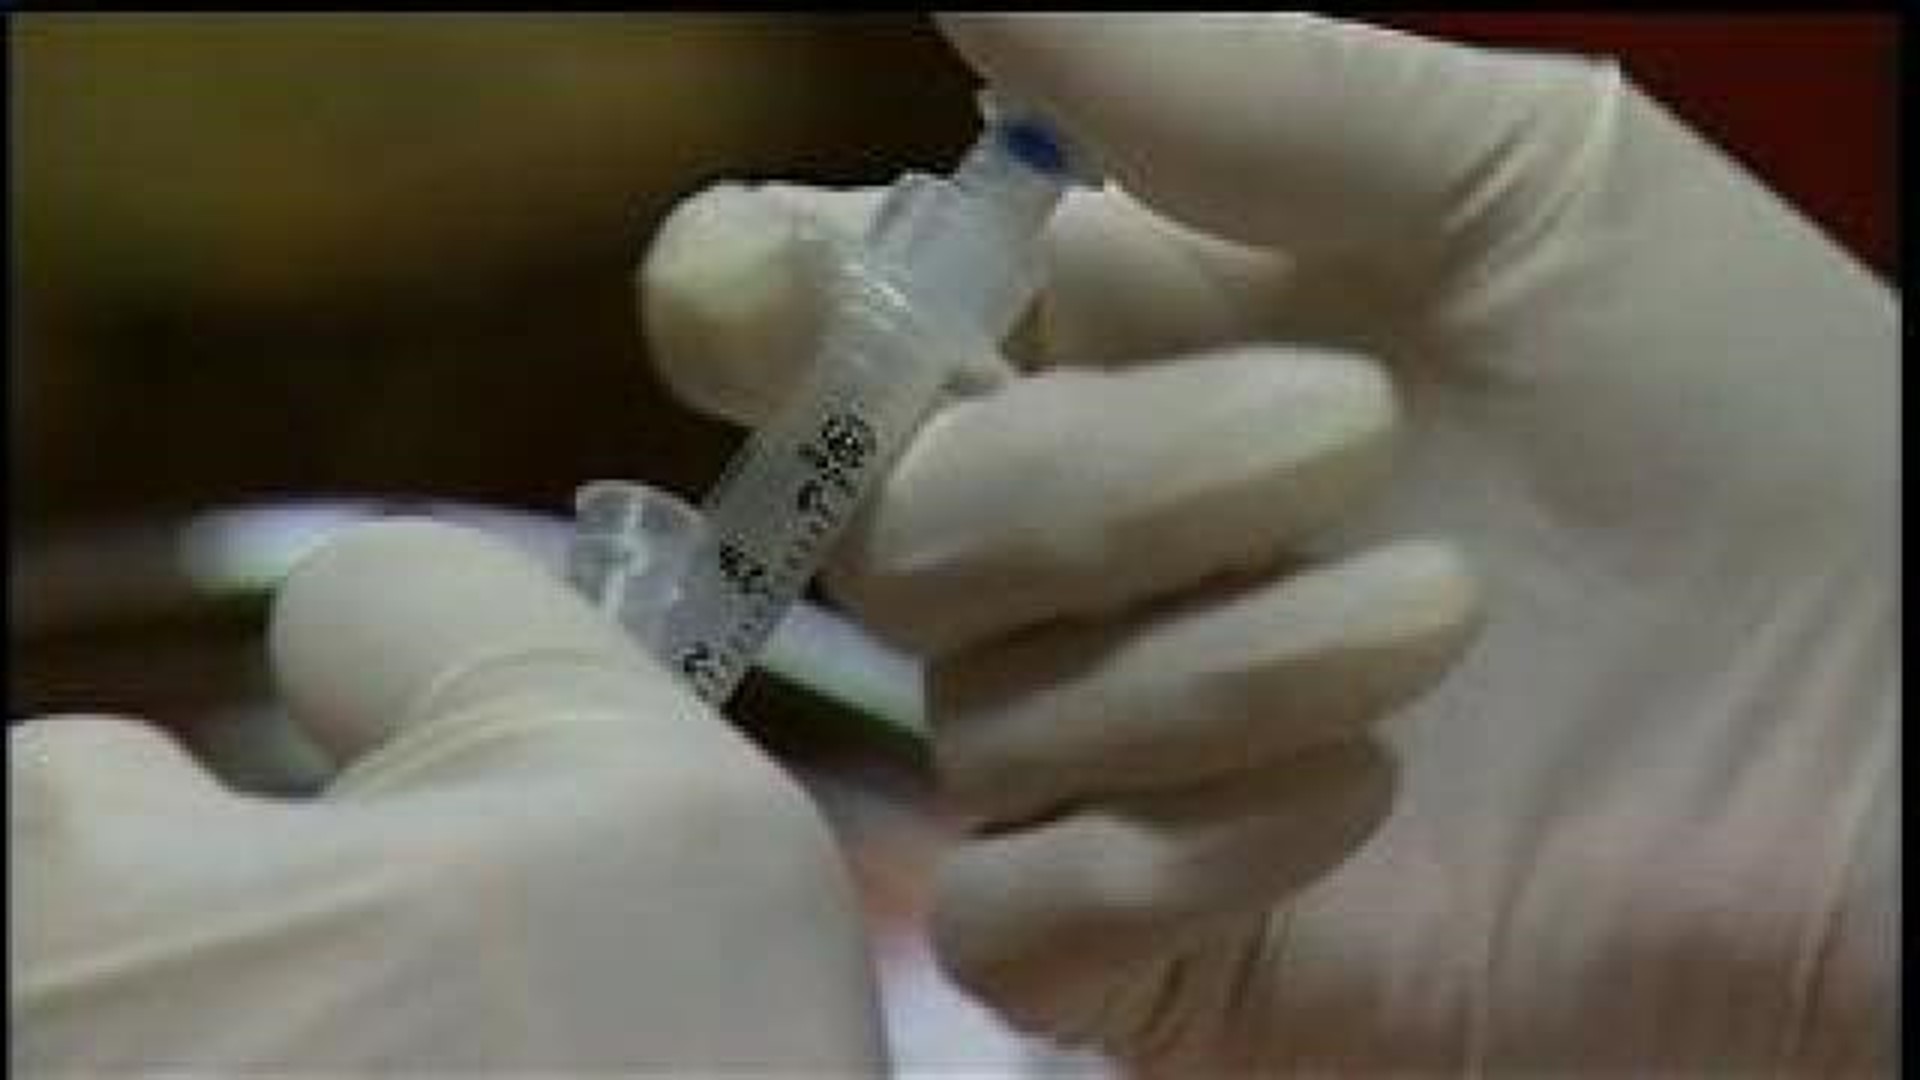 Possible Measles Exposure for Hospital Patients